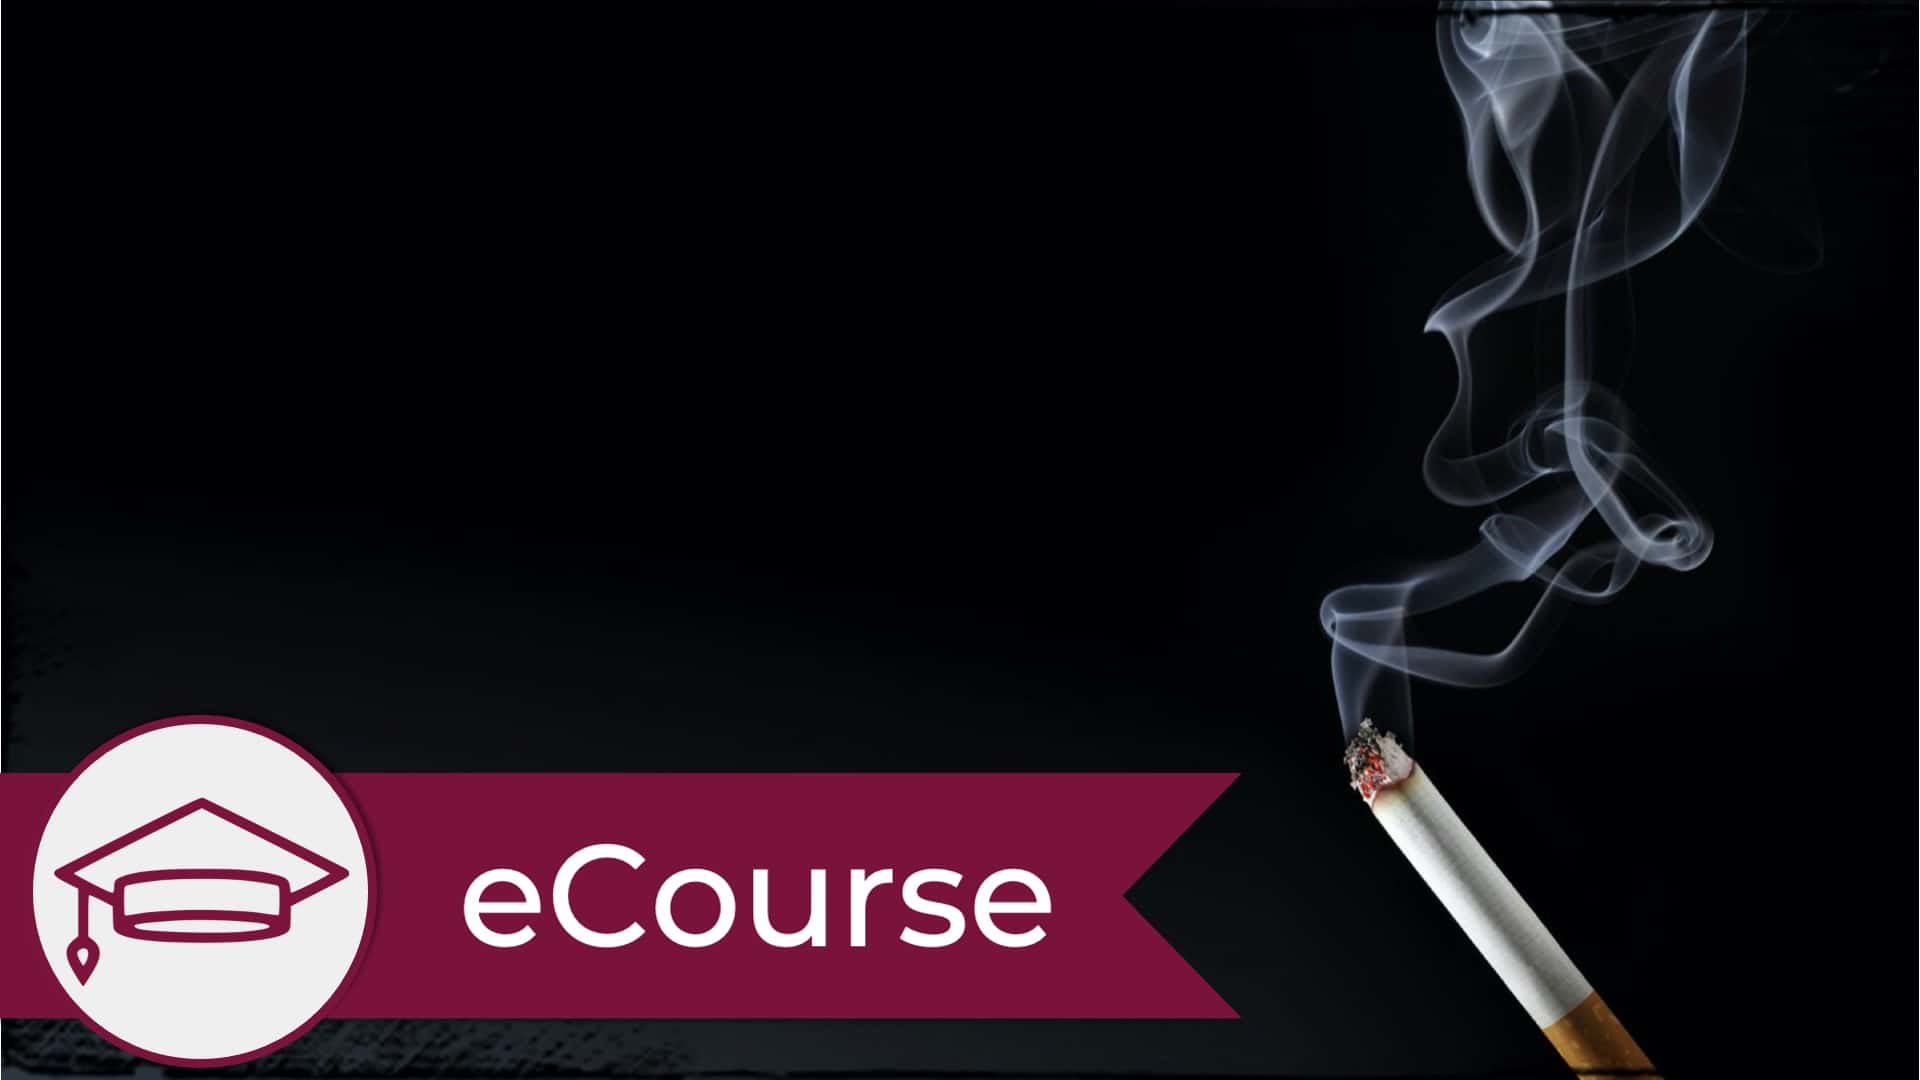 A lit cigarette with a trail of smoke rising into the air against a black background. A graduate cap icon is in the lower left, signifying this is an eCourse.